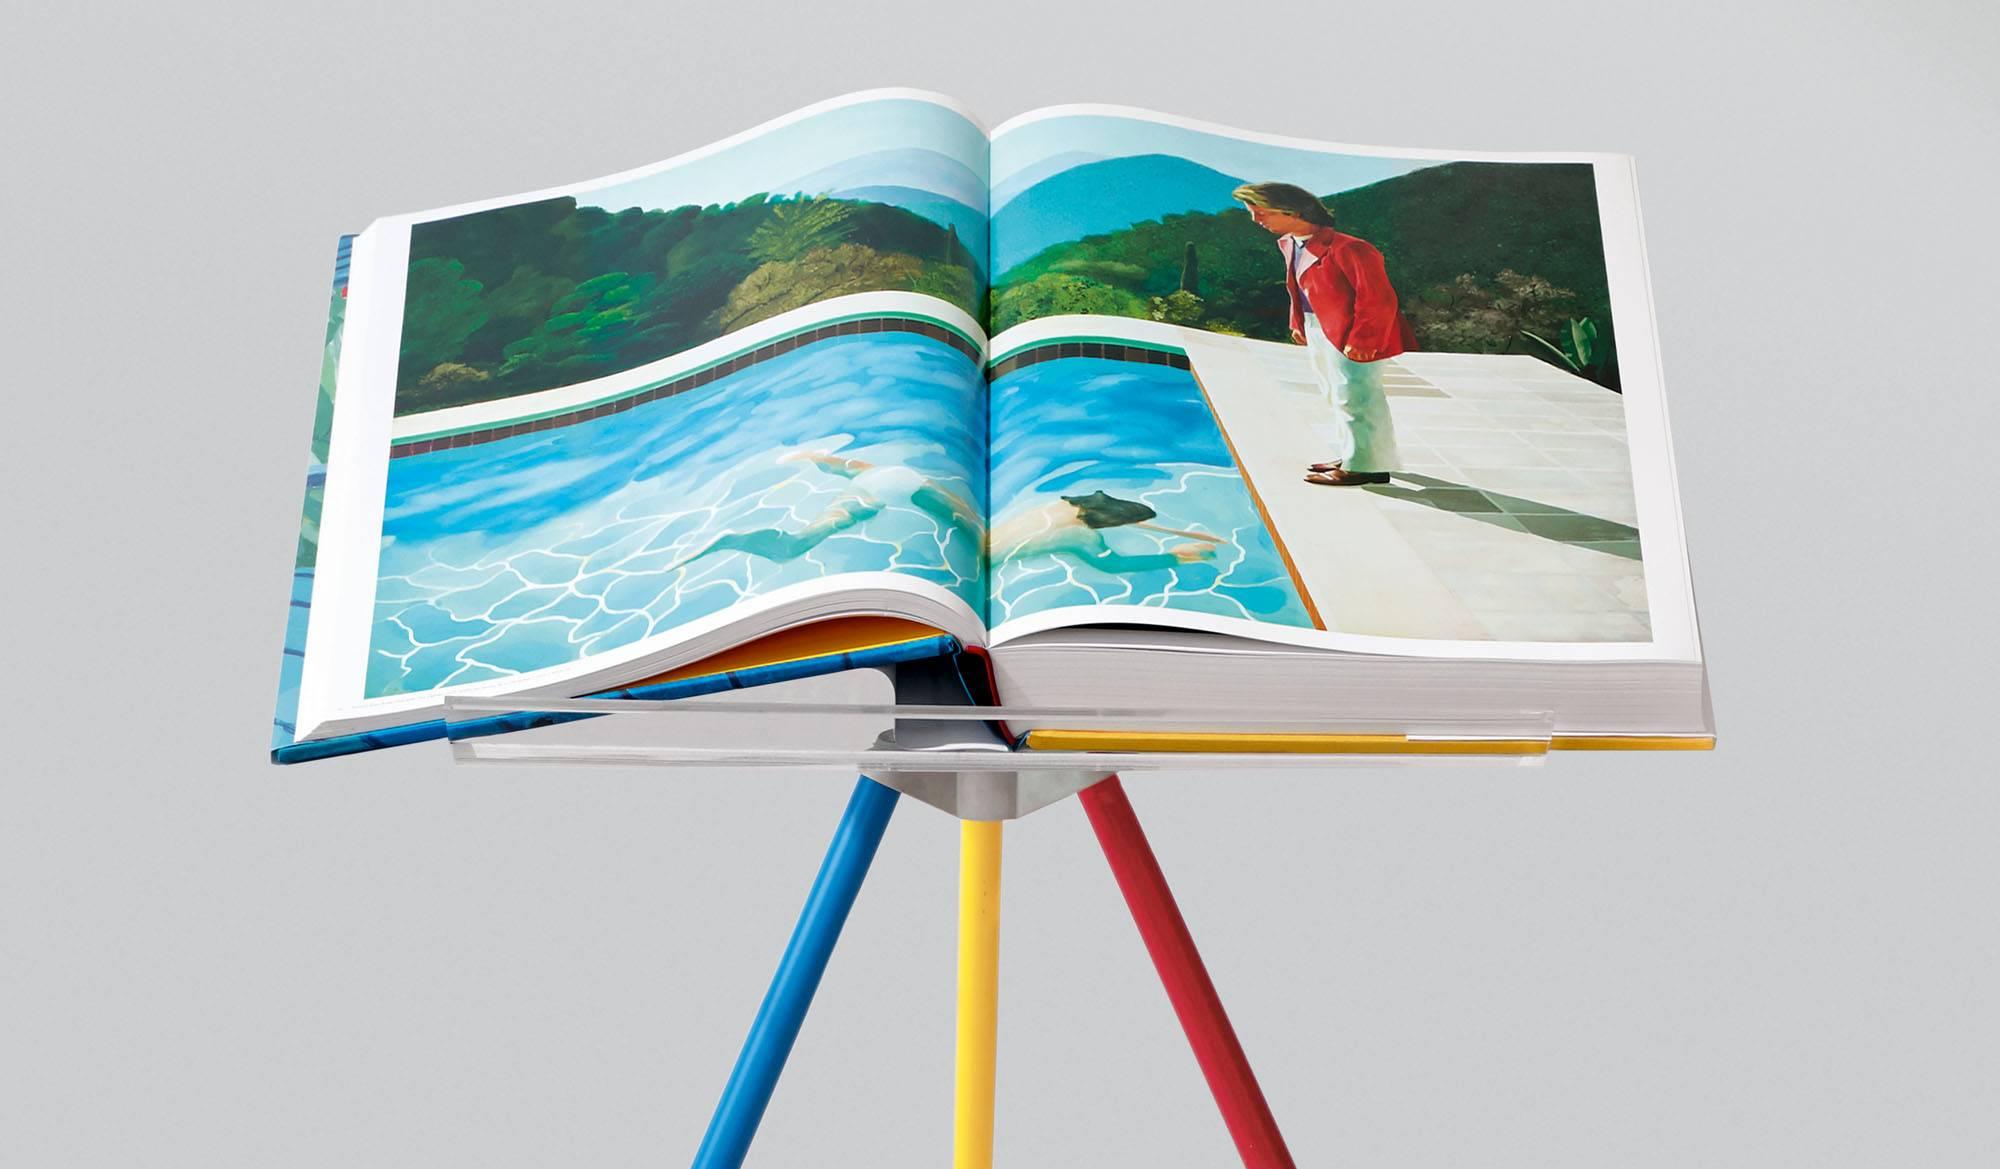 Hardcover, 50 x 70 cm (19.6 x 27.5 in.), 498 pages, 13 fold-outs, with an adjustable bookstand designed by Marc Newson, plus an illustrated 680-page chronology book

A Bigger Book, TASCHEN’s SUMO-sized David Hockney monograph, is as spectacular in